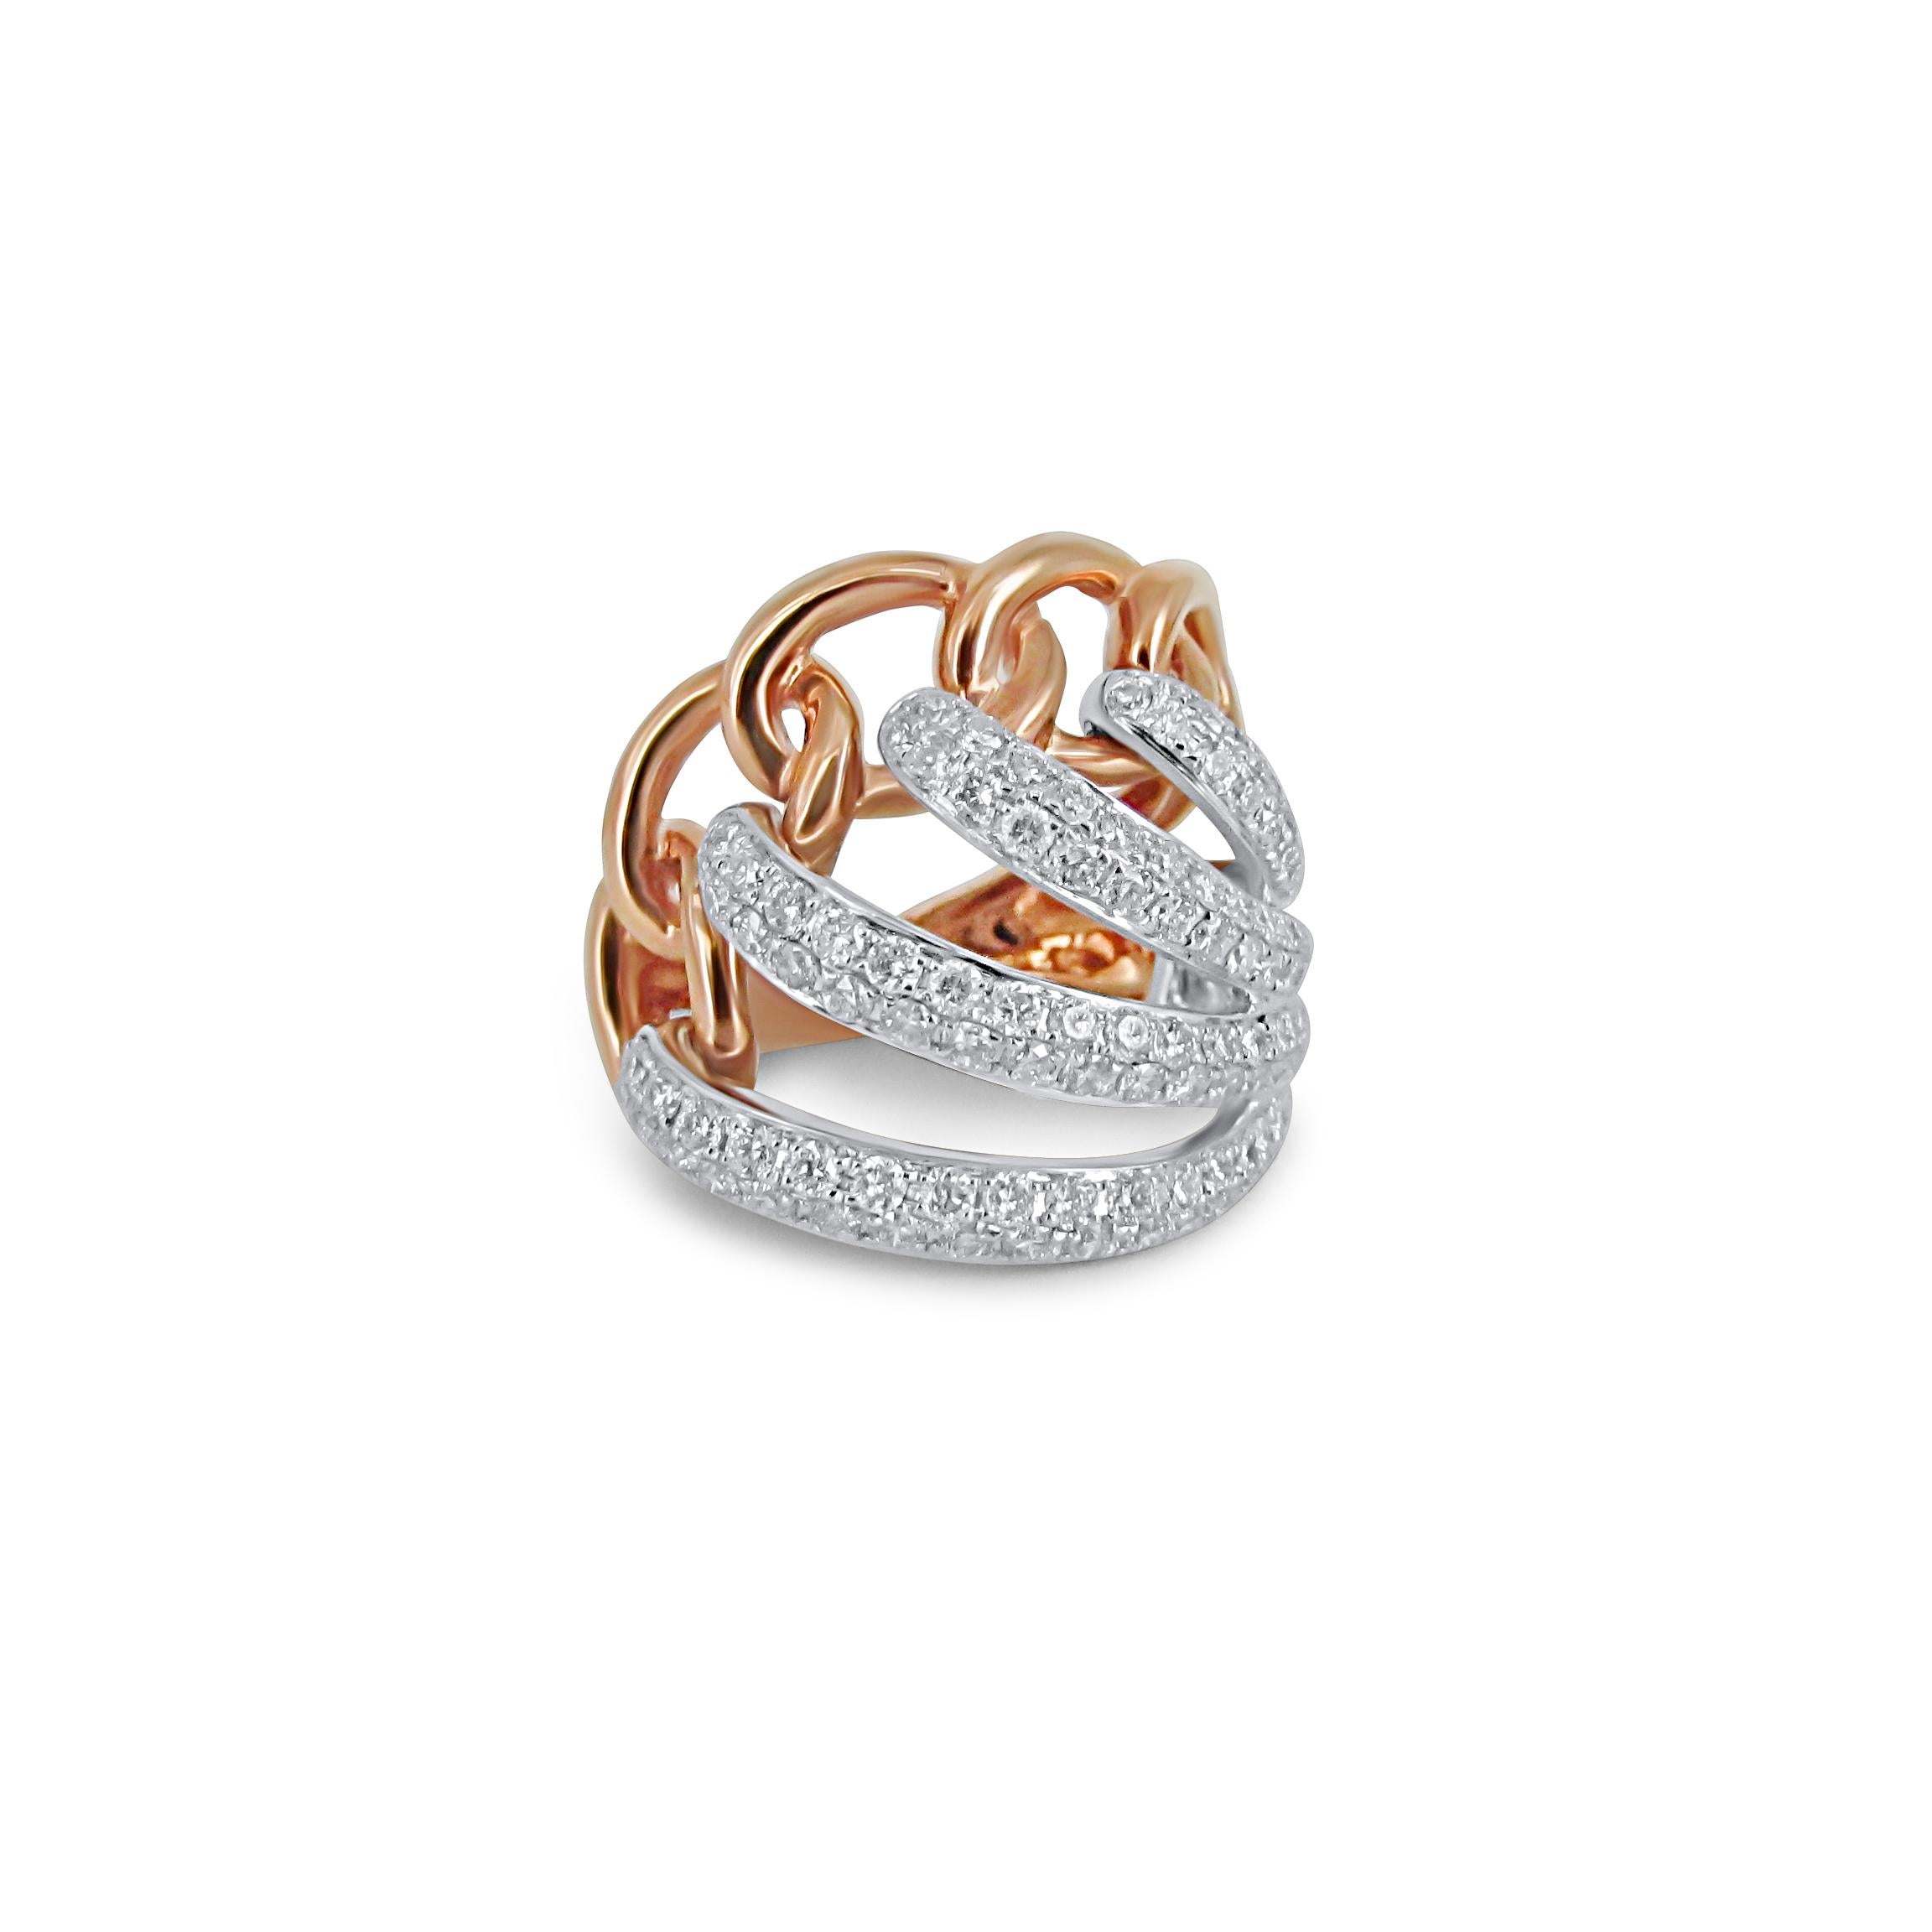 Total Ring Carat Weight: 1.22cts
Diamond Clarity: VS1
Diamond Color: G
Gold Purity: 18k
Gold Color: Rose/White
Gold Weight: 9.03g
Diamond Type: Natural Diamond, Conflict-Free

This piece has been designed and curated with a creative and artistic